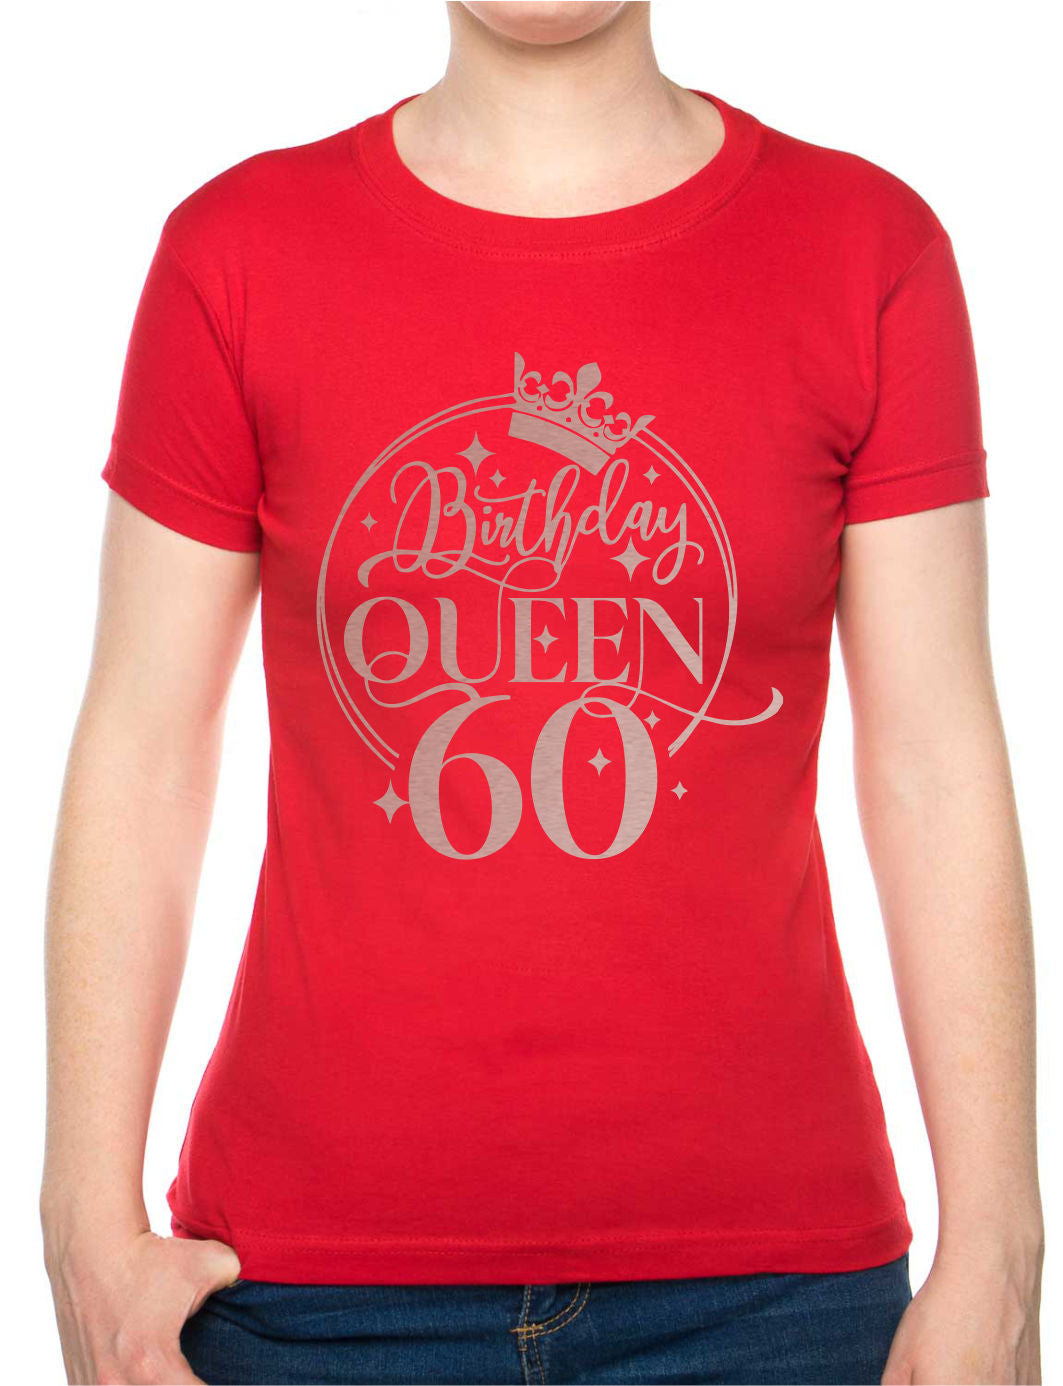 Birthday Queen 60 Ladies Fit T-Shirt 60th Birthday Gift Womens Tee In Rose Gold